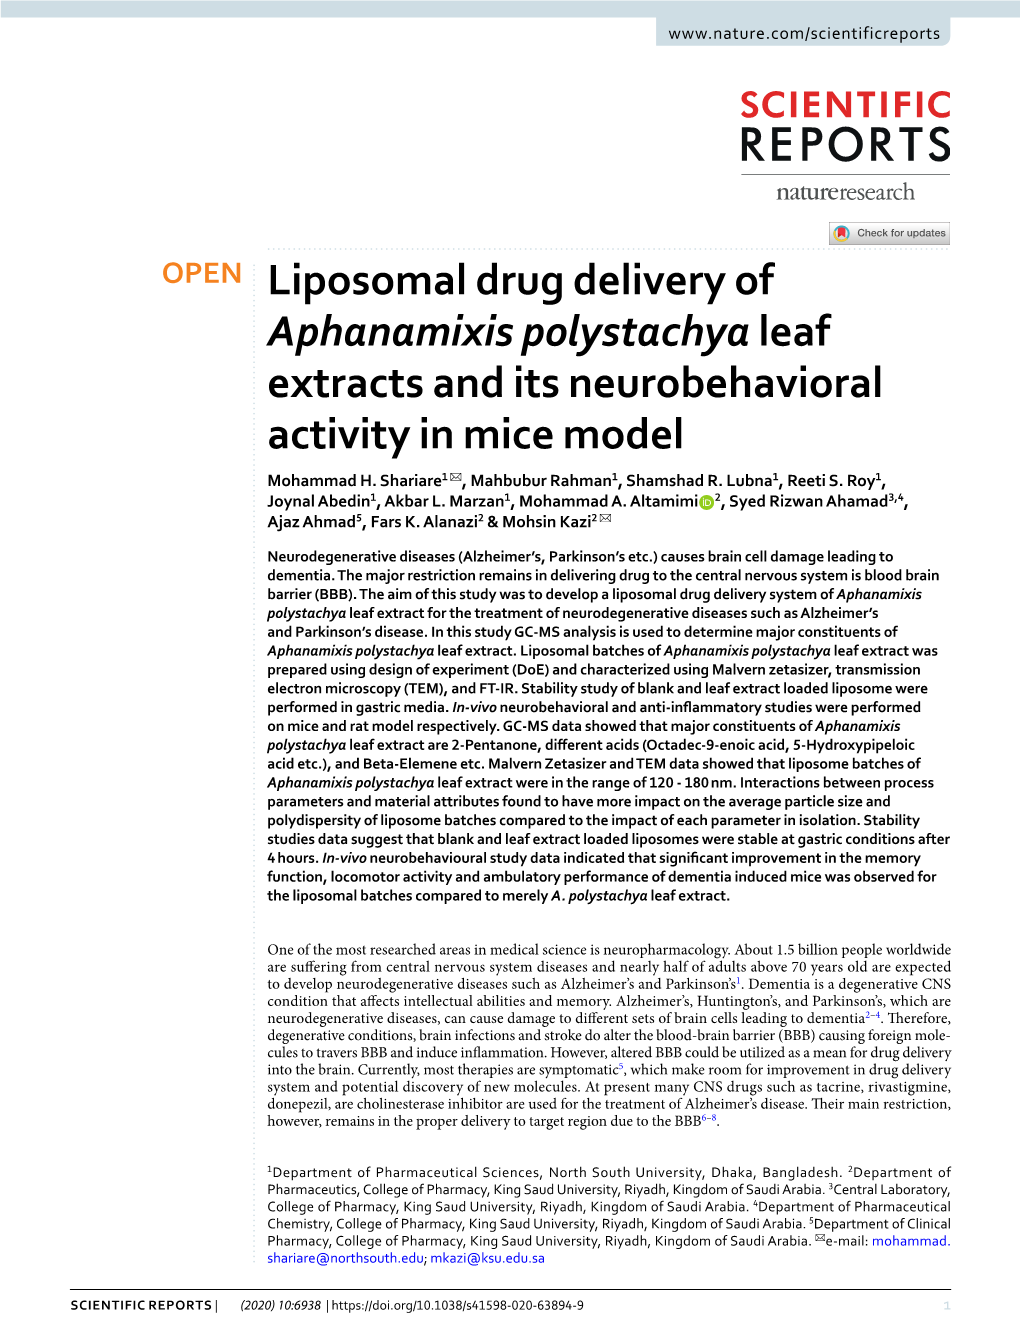 Liposomal Drug Delivery of Aphanamixis Polystachya Leaf Extracts and Its Neurobehavioral Activity in Mice Model Mohammad H